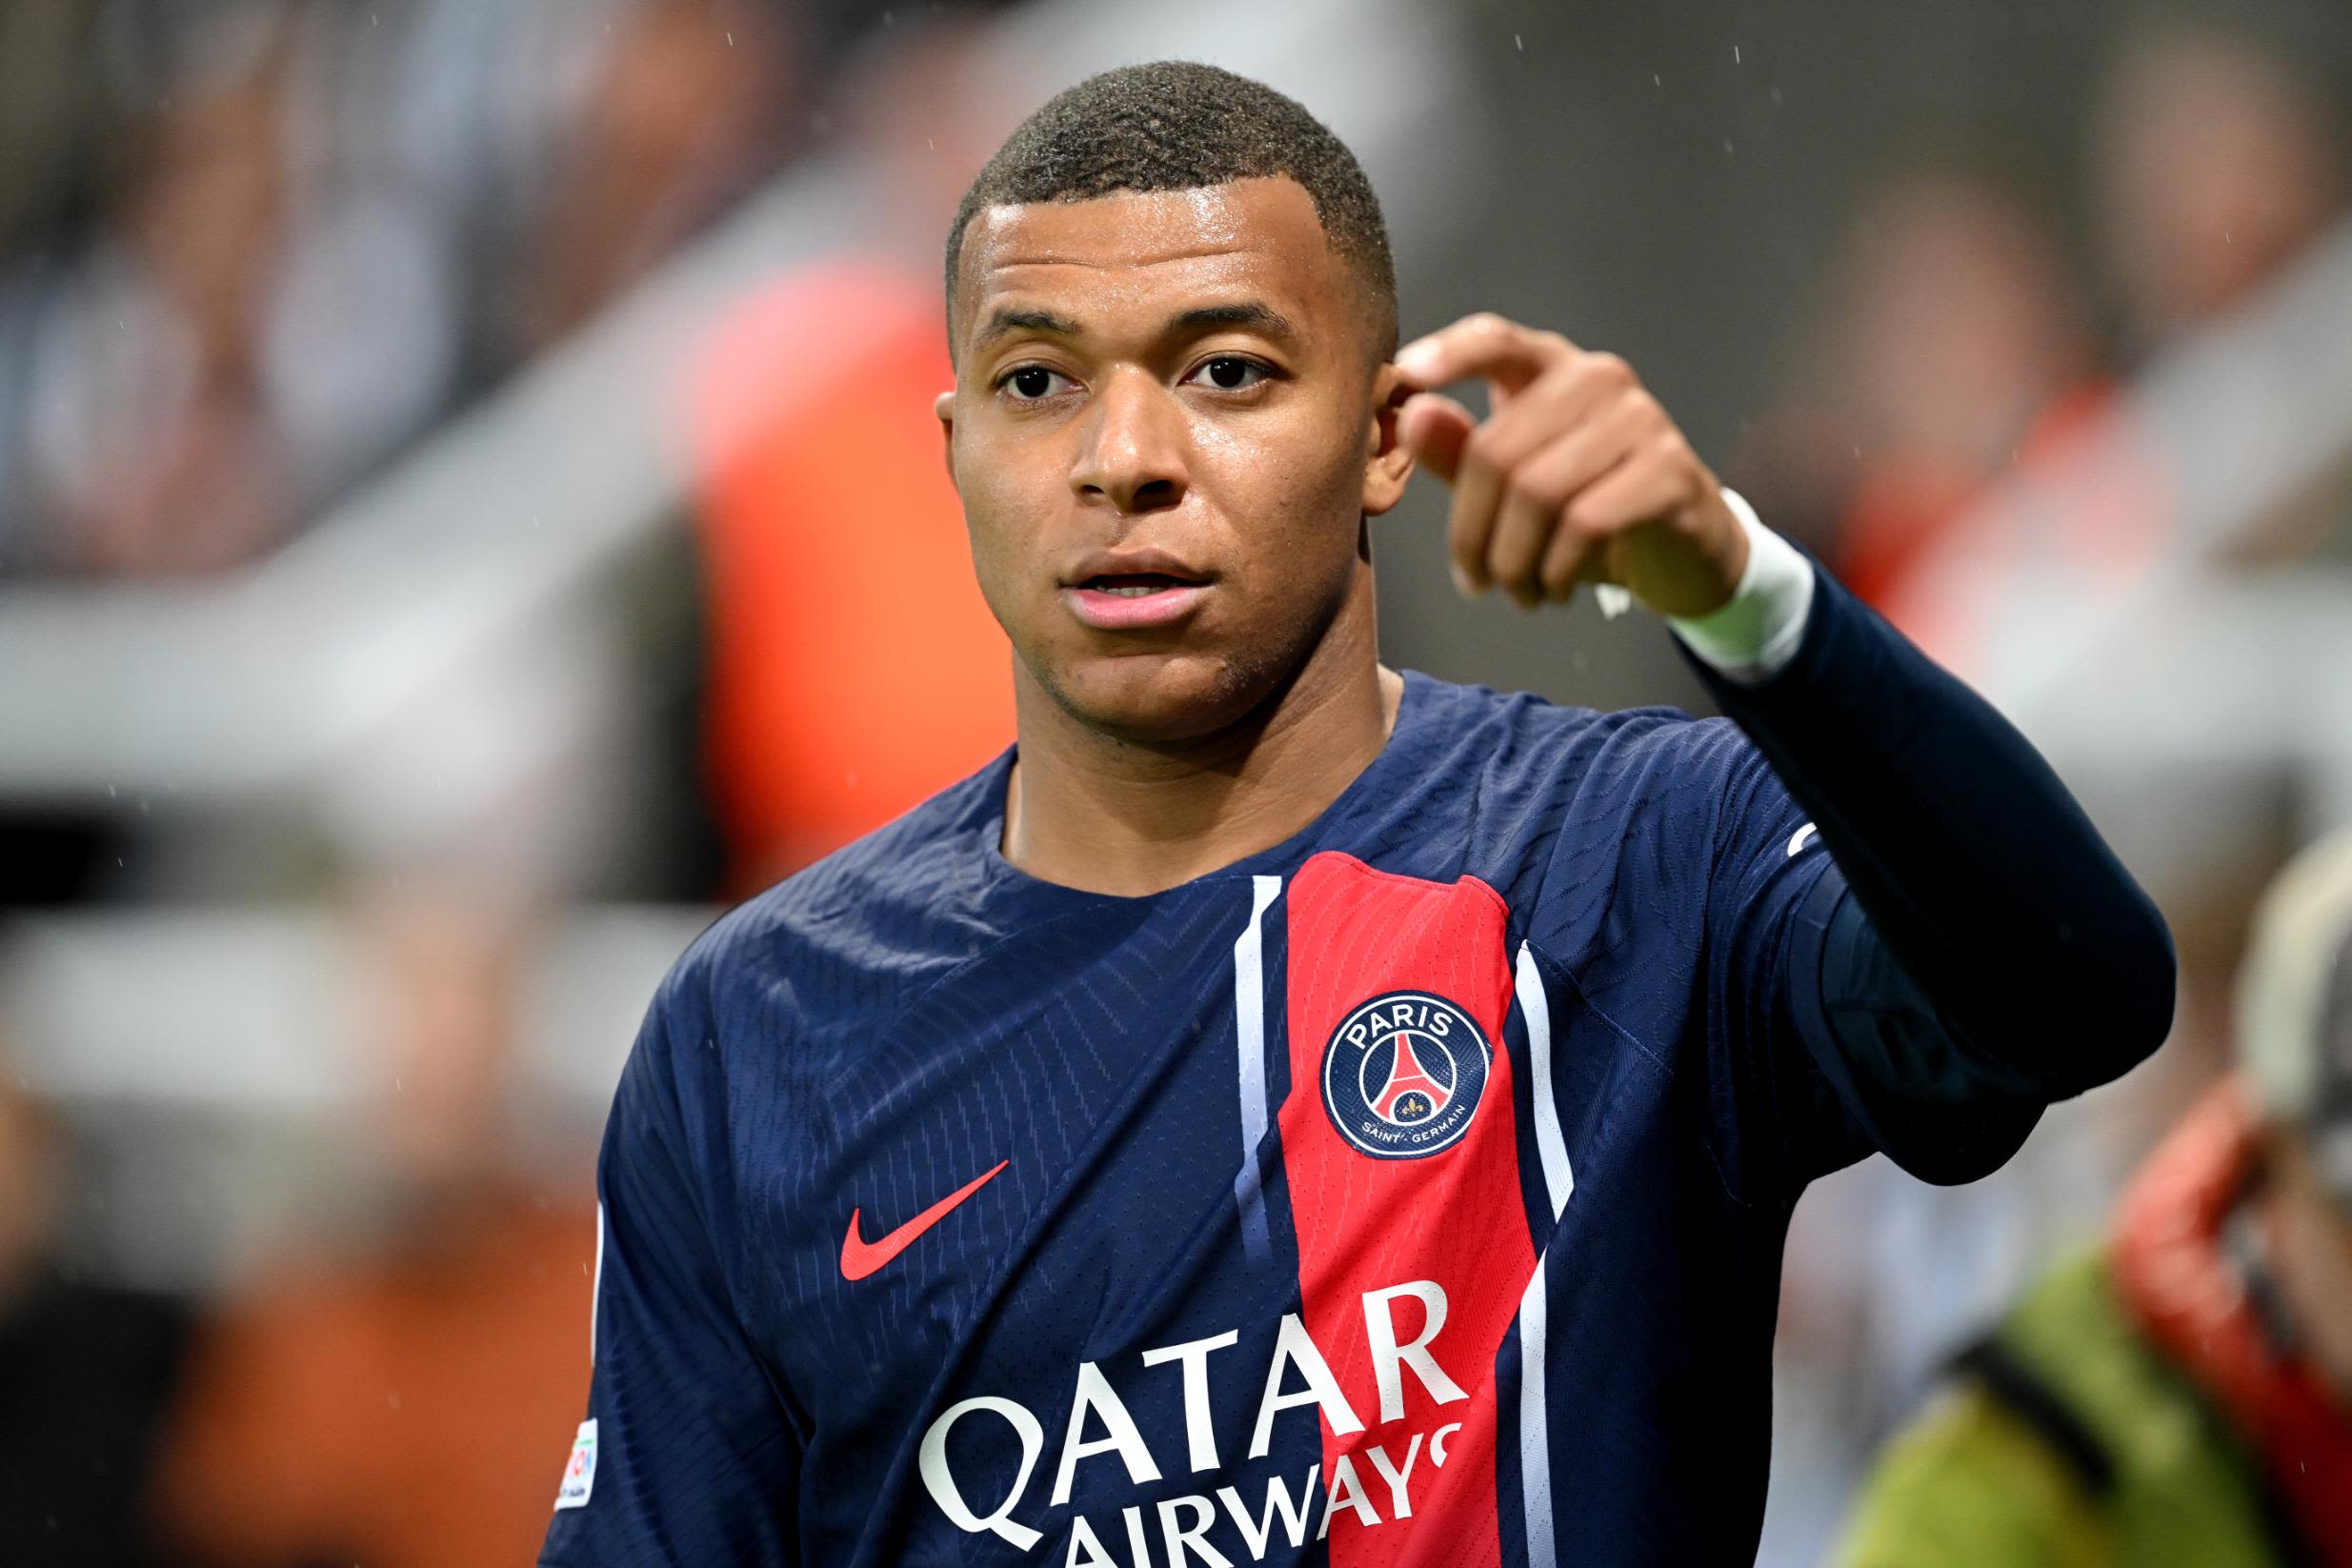 Kylian Mbappé Signs New Real Madrid Deal | Fab.ng